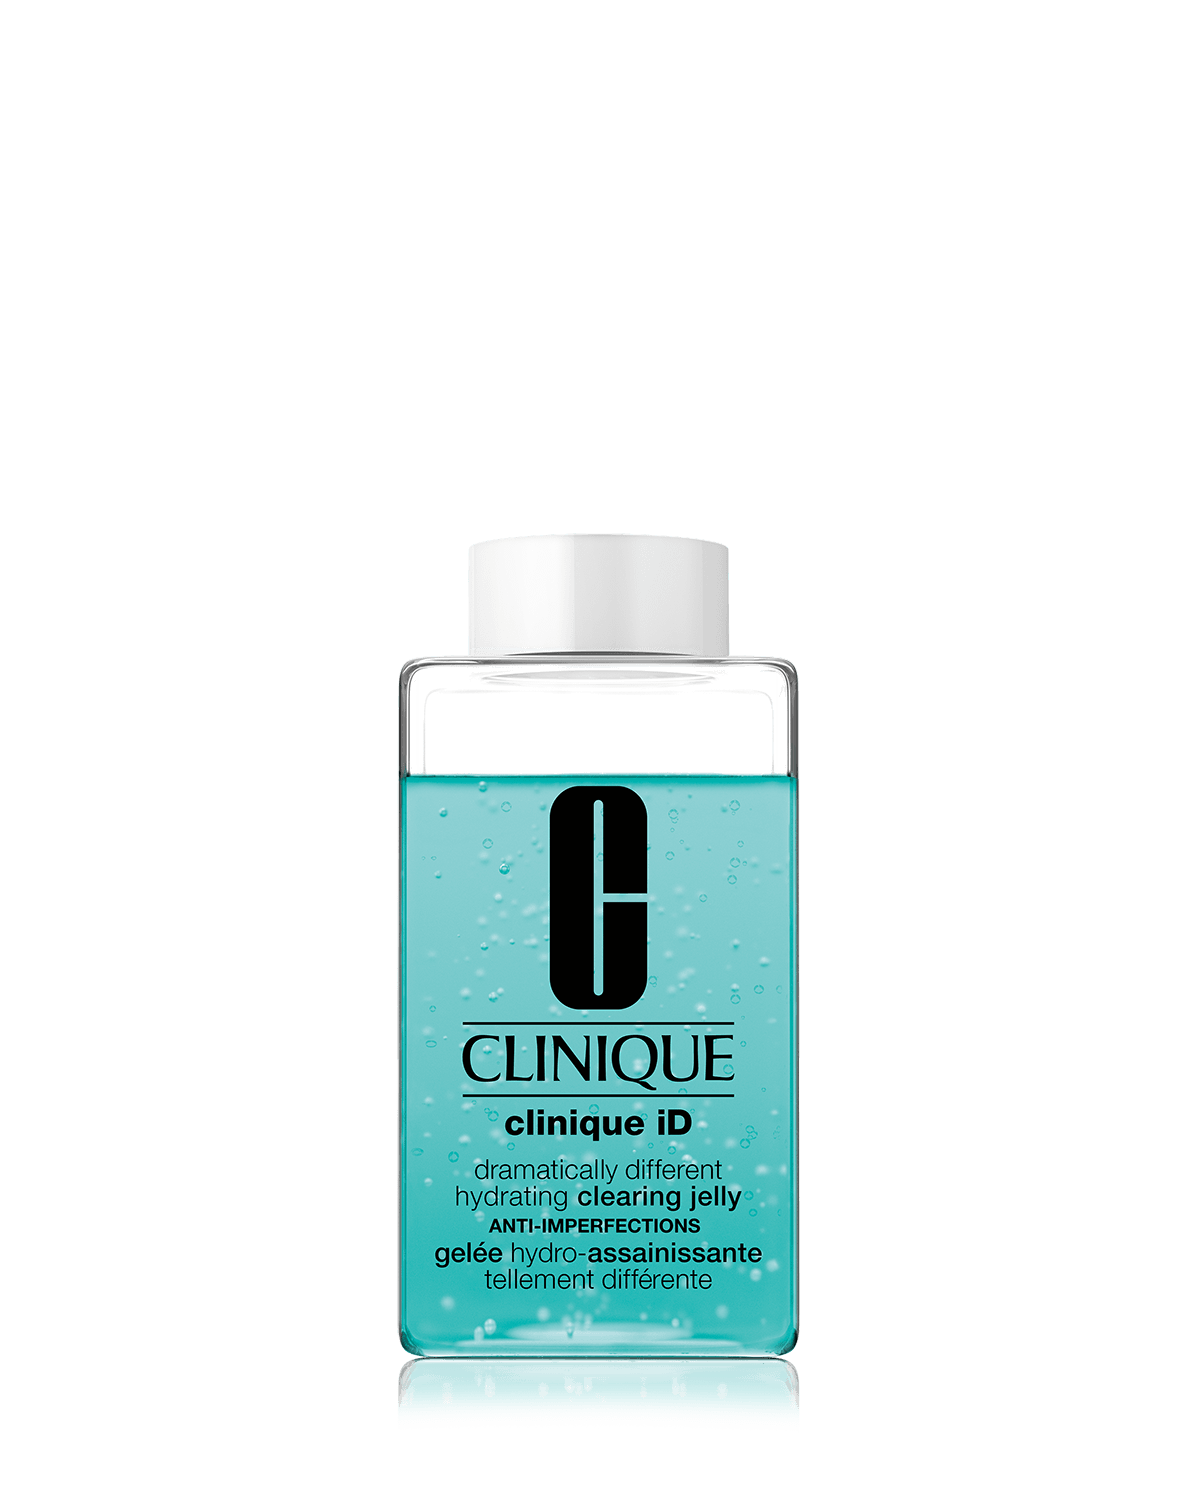 Clinique iD™: Dramatically Different Hydrating Clearing Jelly